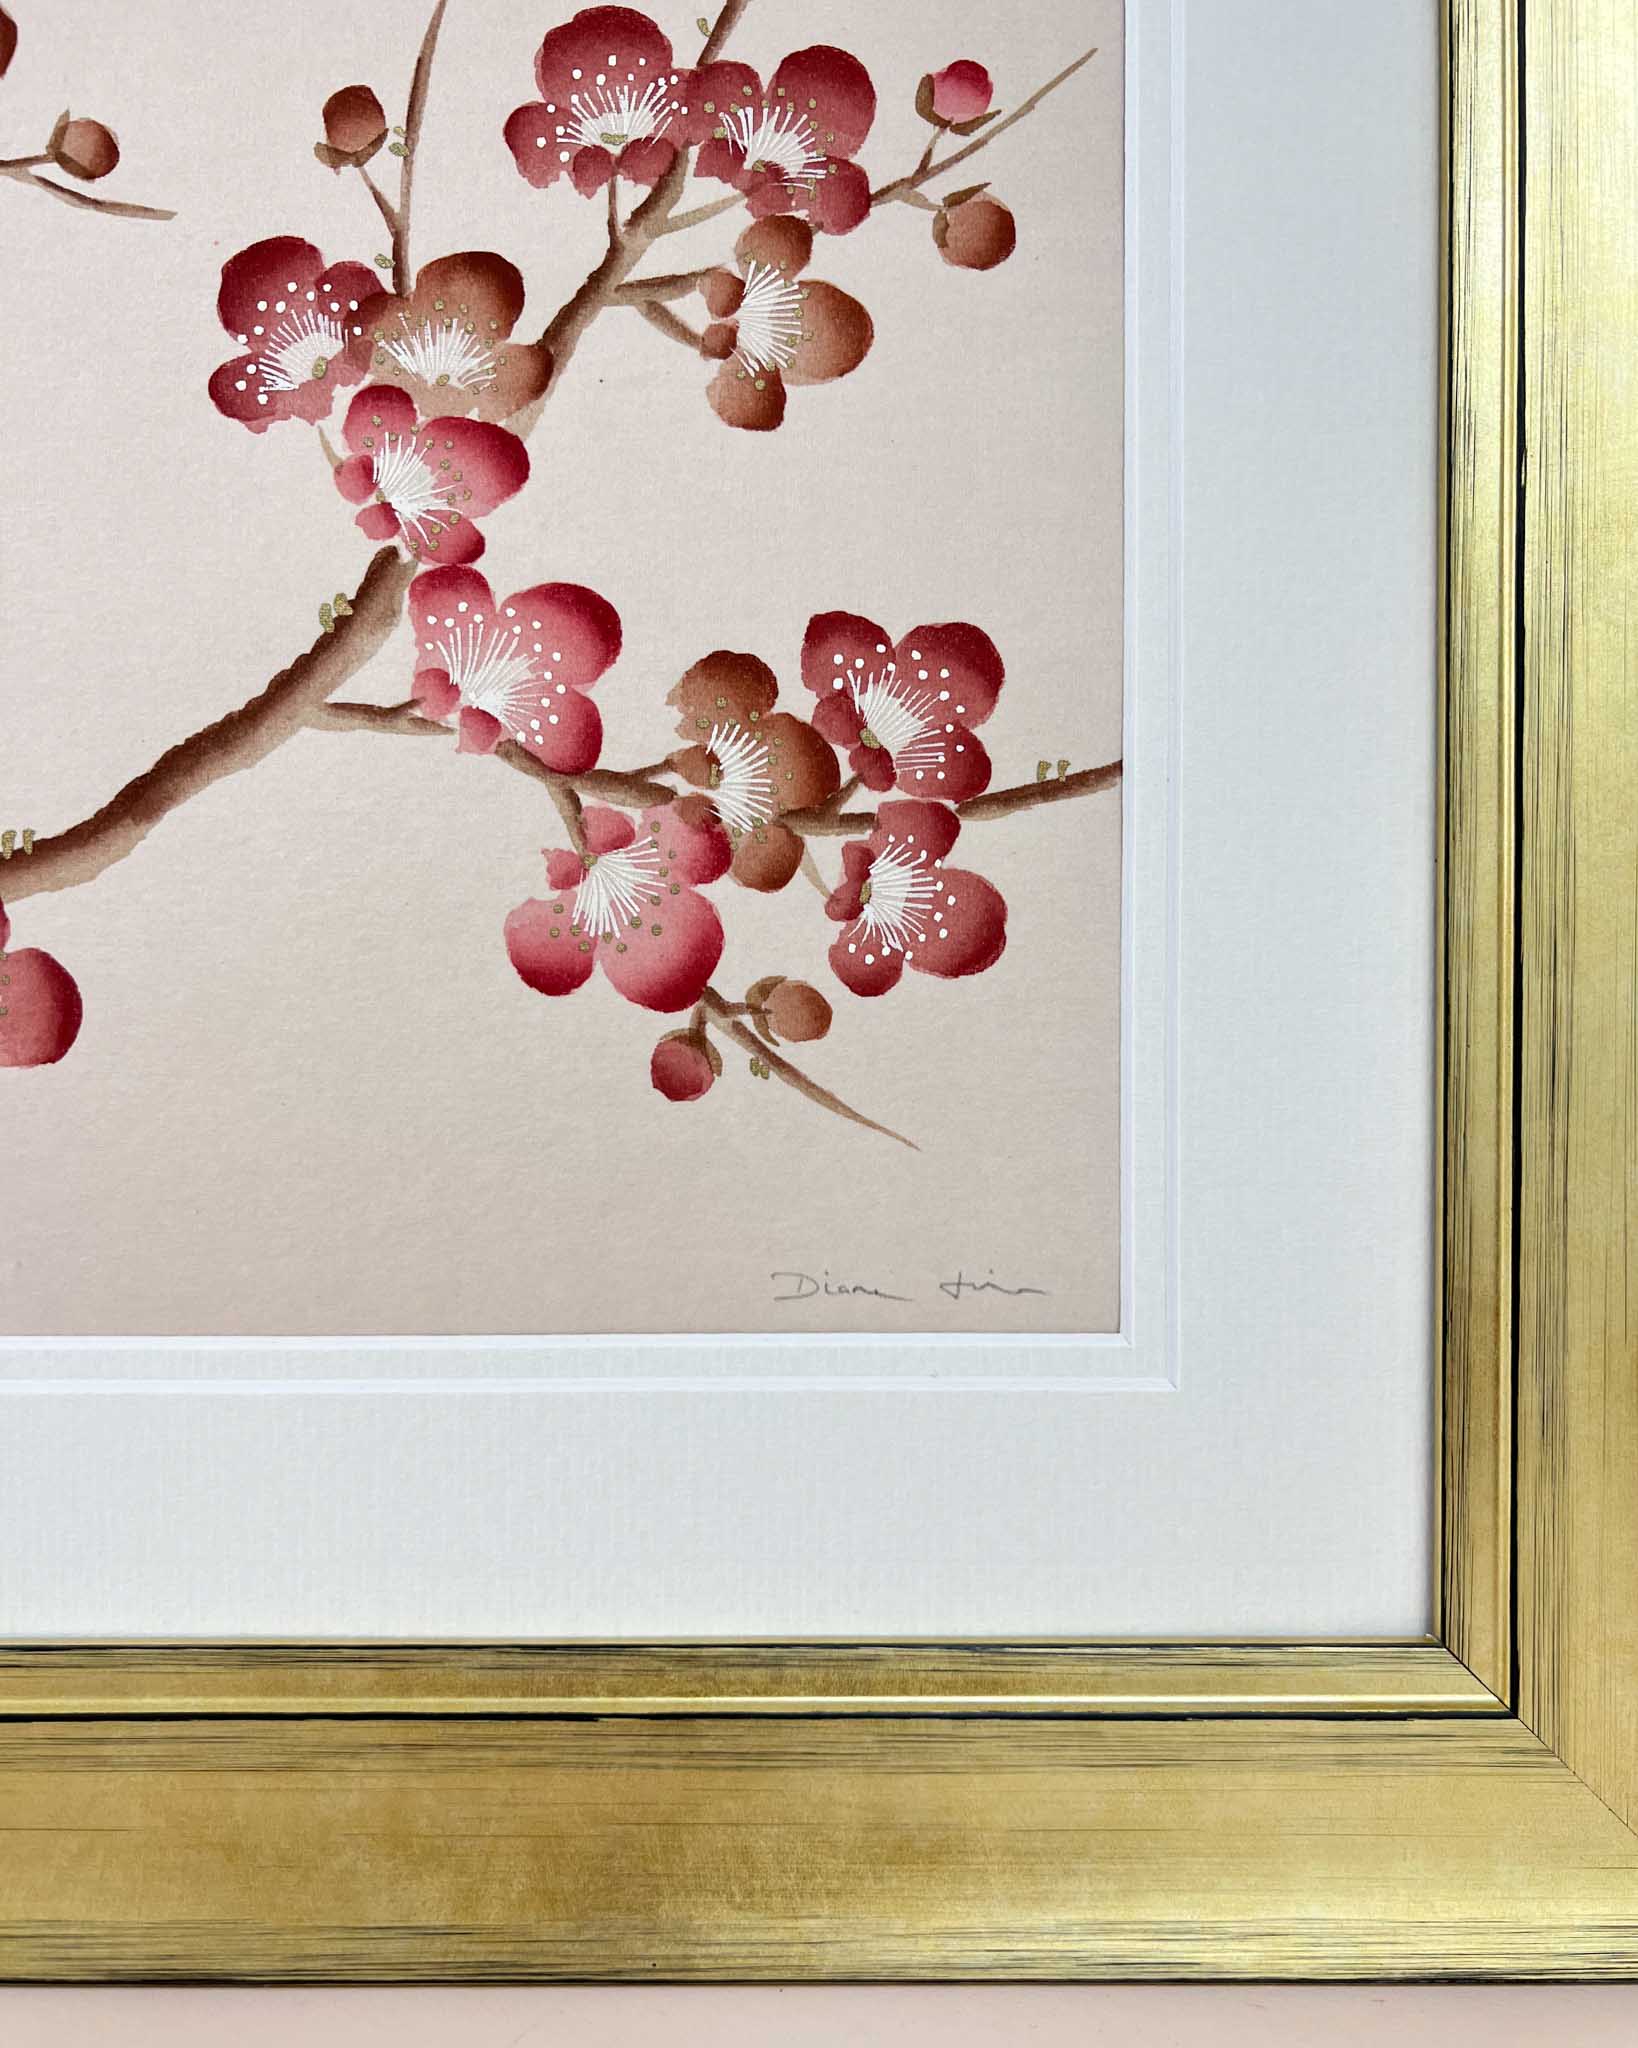 Up close photograph of the detailed pink blossom flowers painted by Diane Hill on a beige background with a gold frame